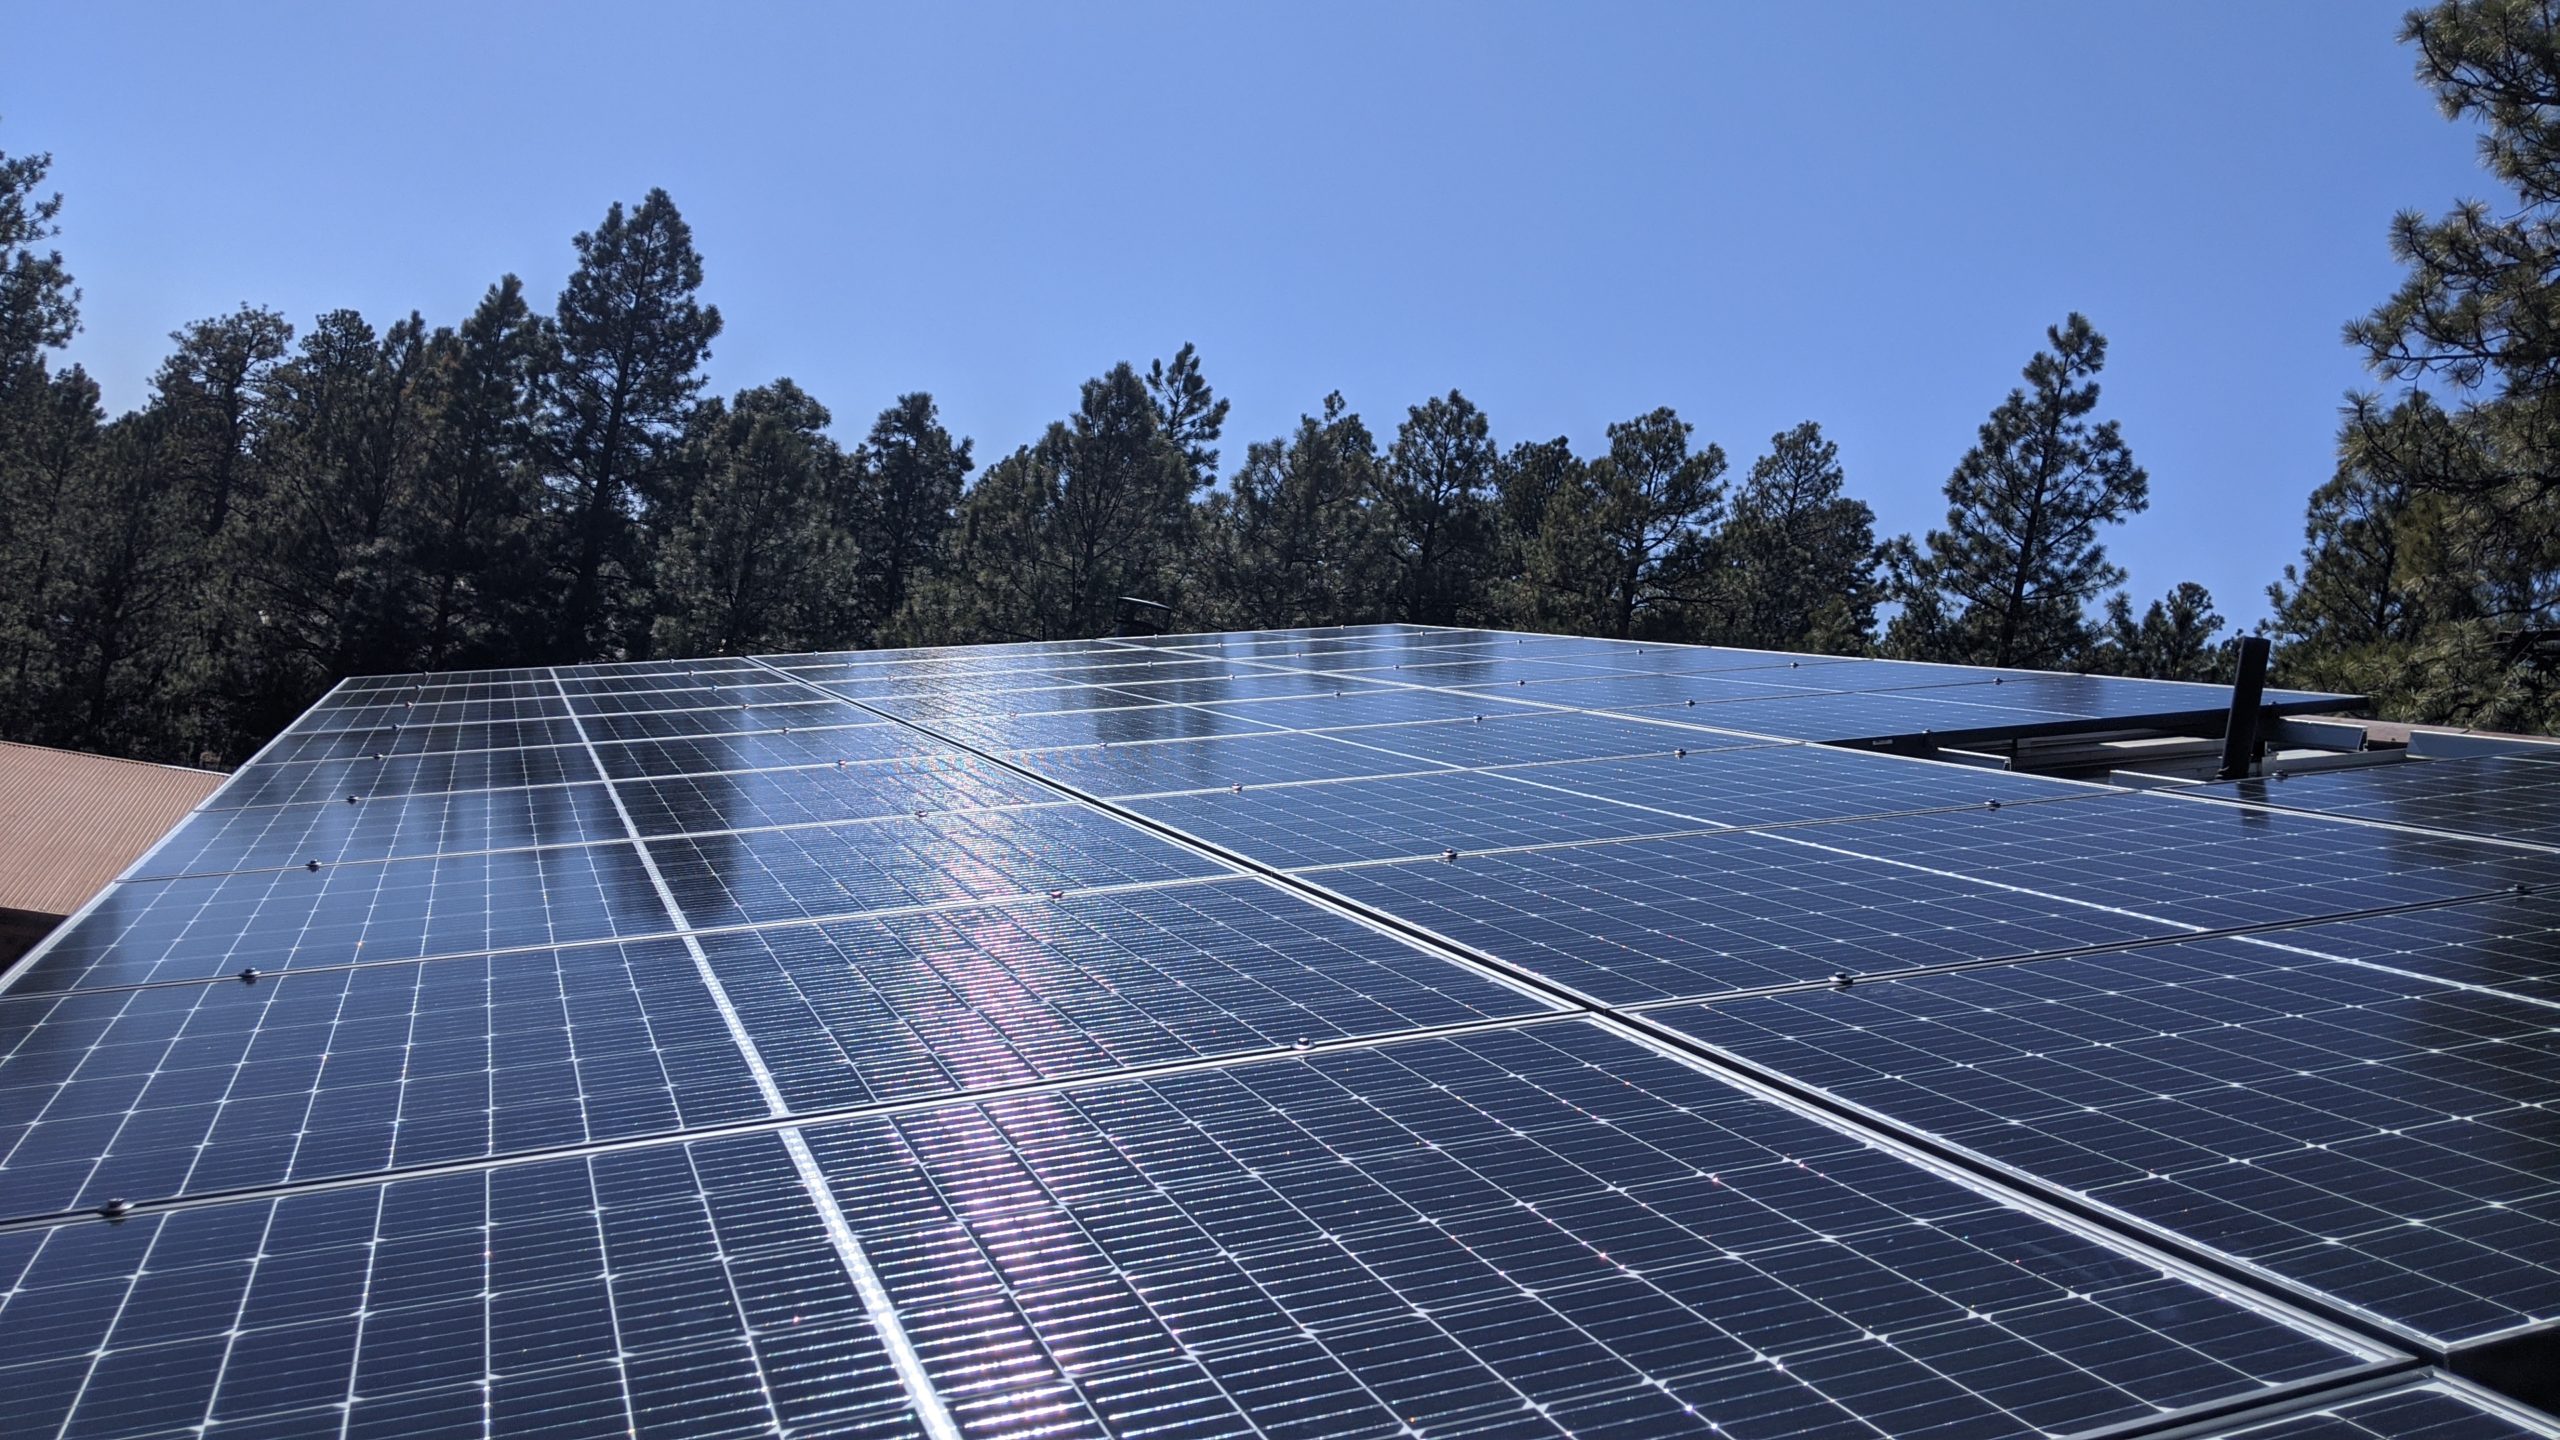 solar panels in front of pine trees